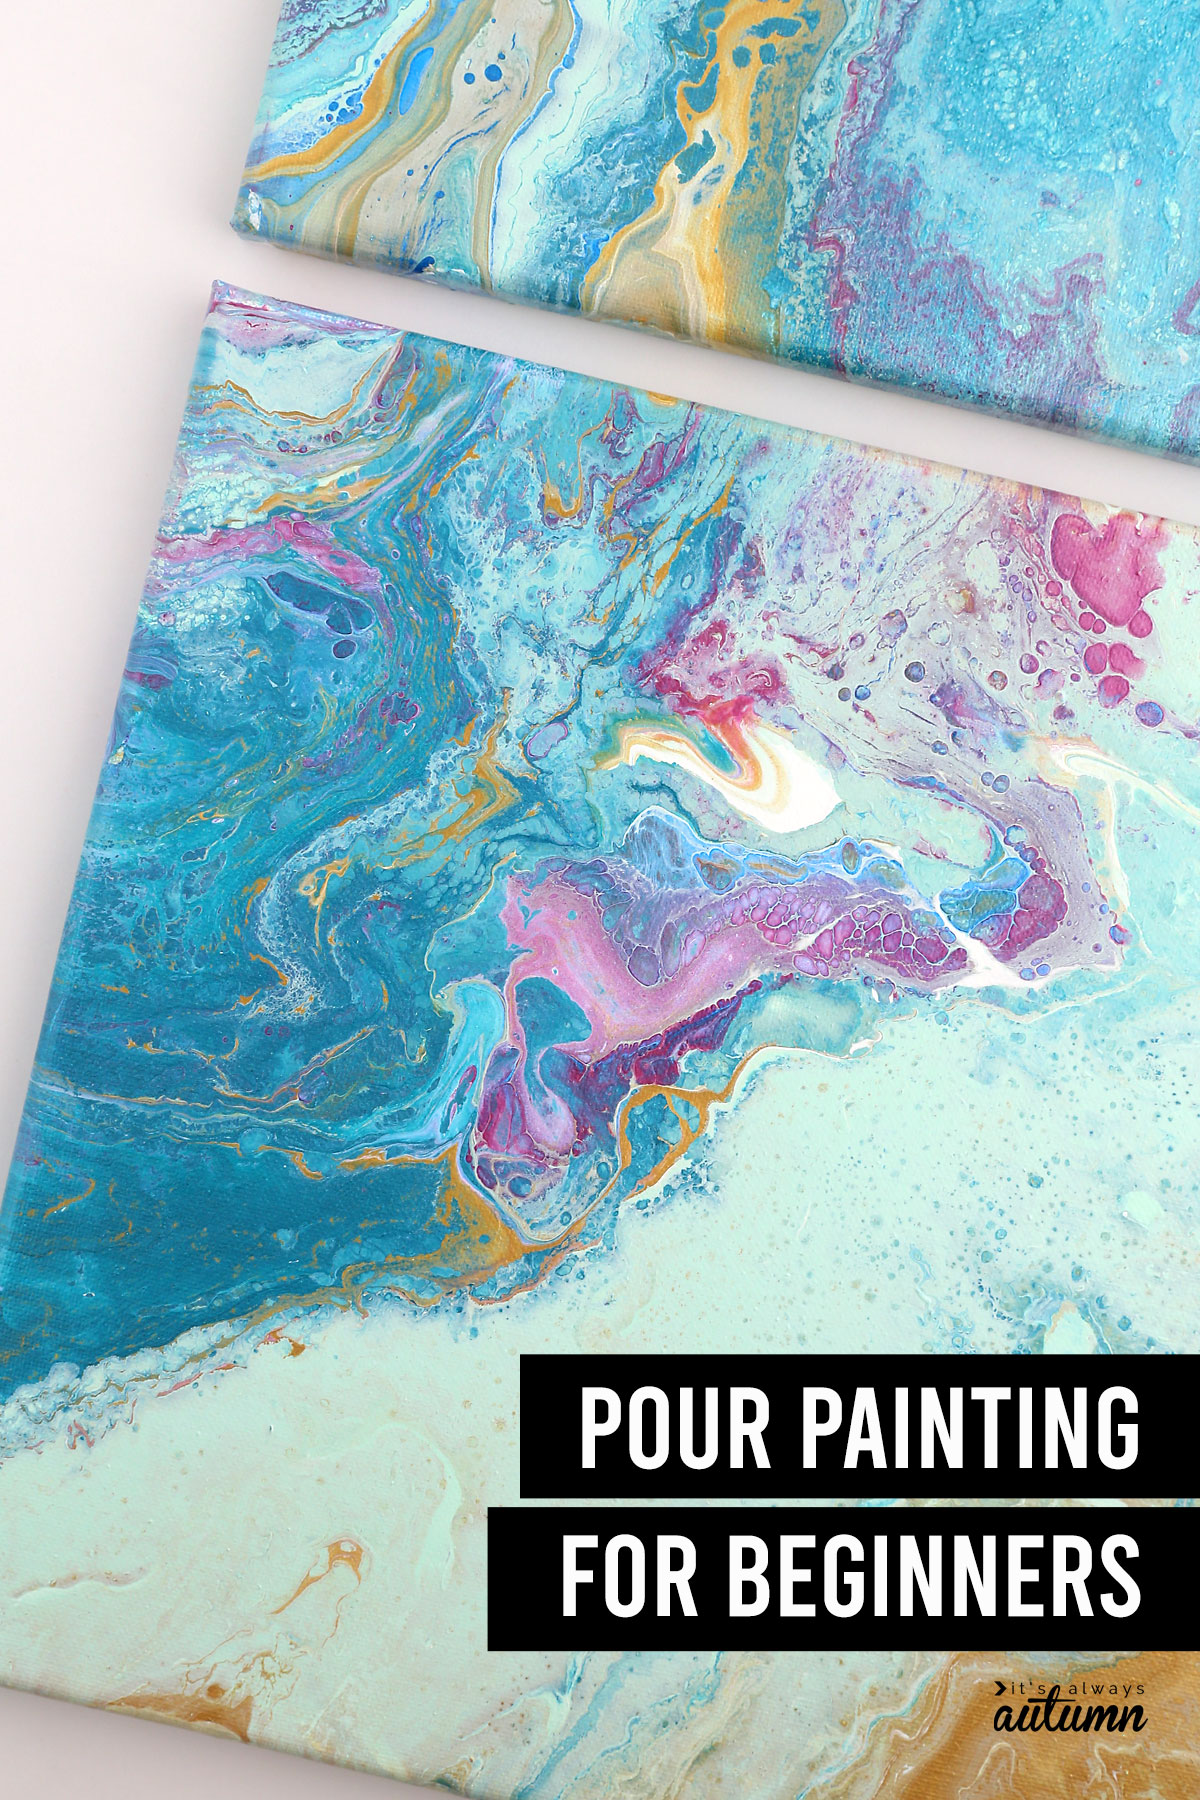 5 Basic Acrylic Pour Techniques to Master